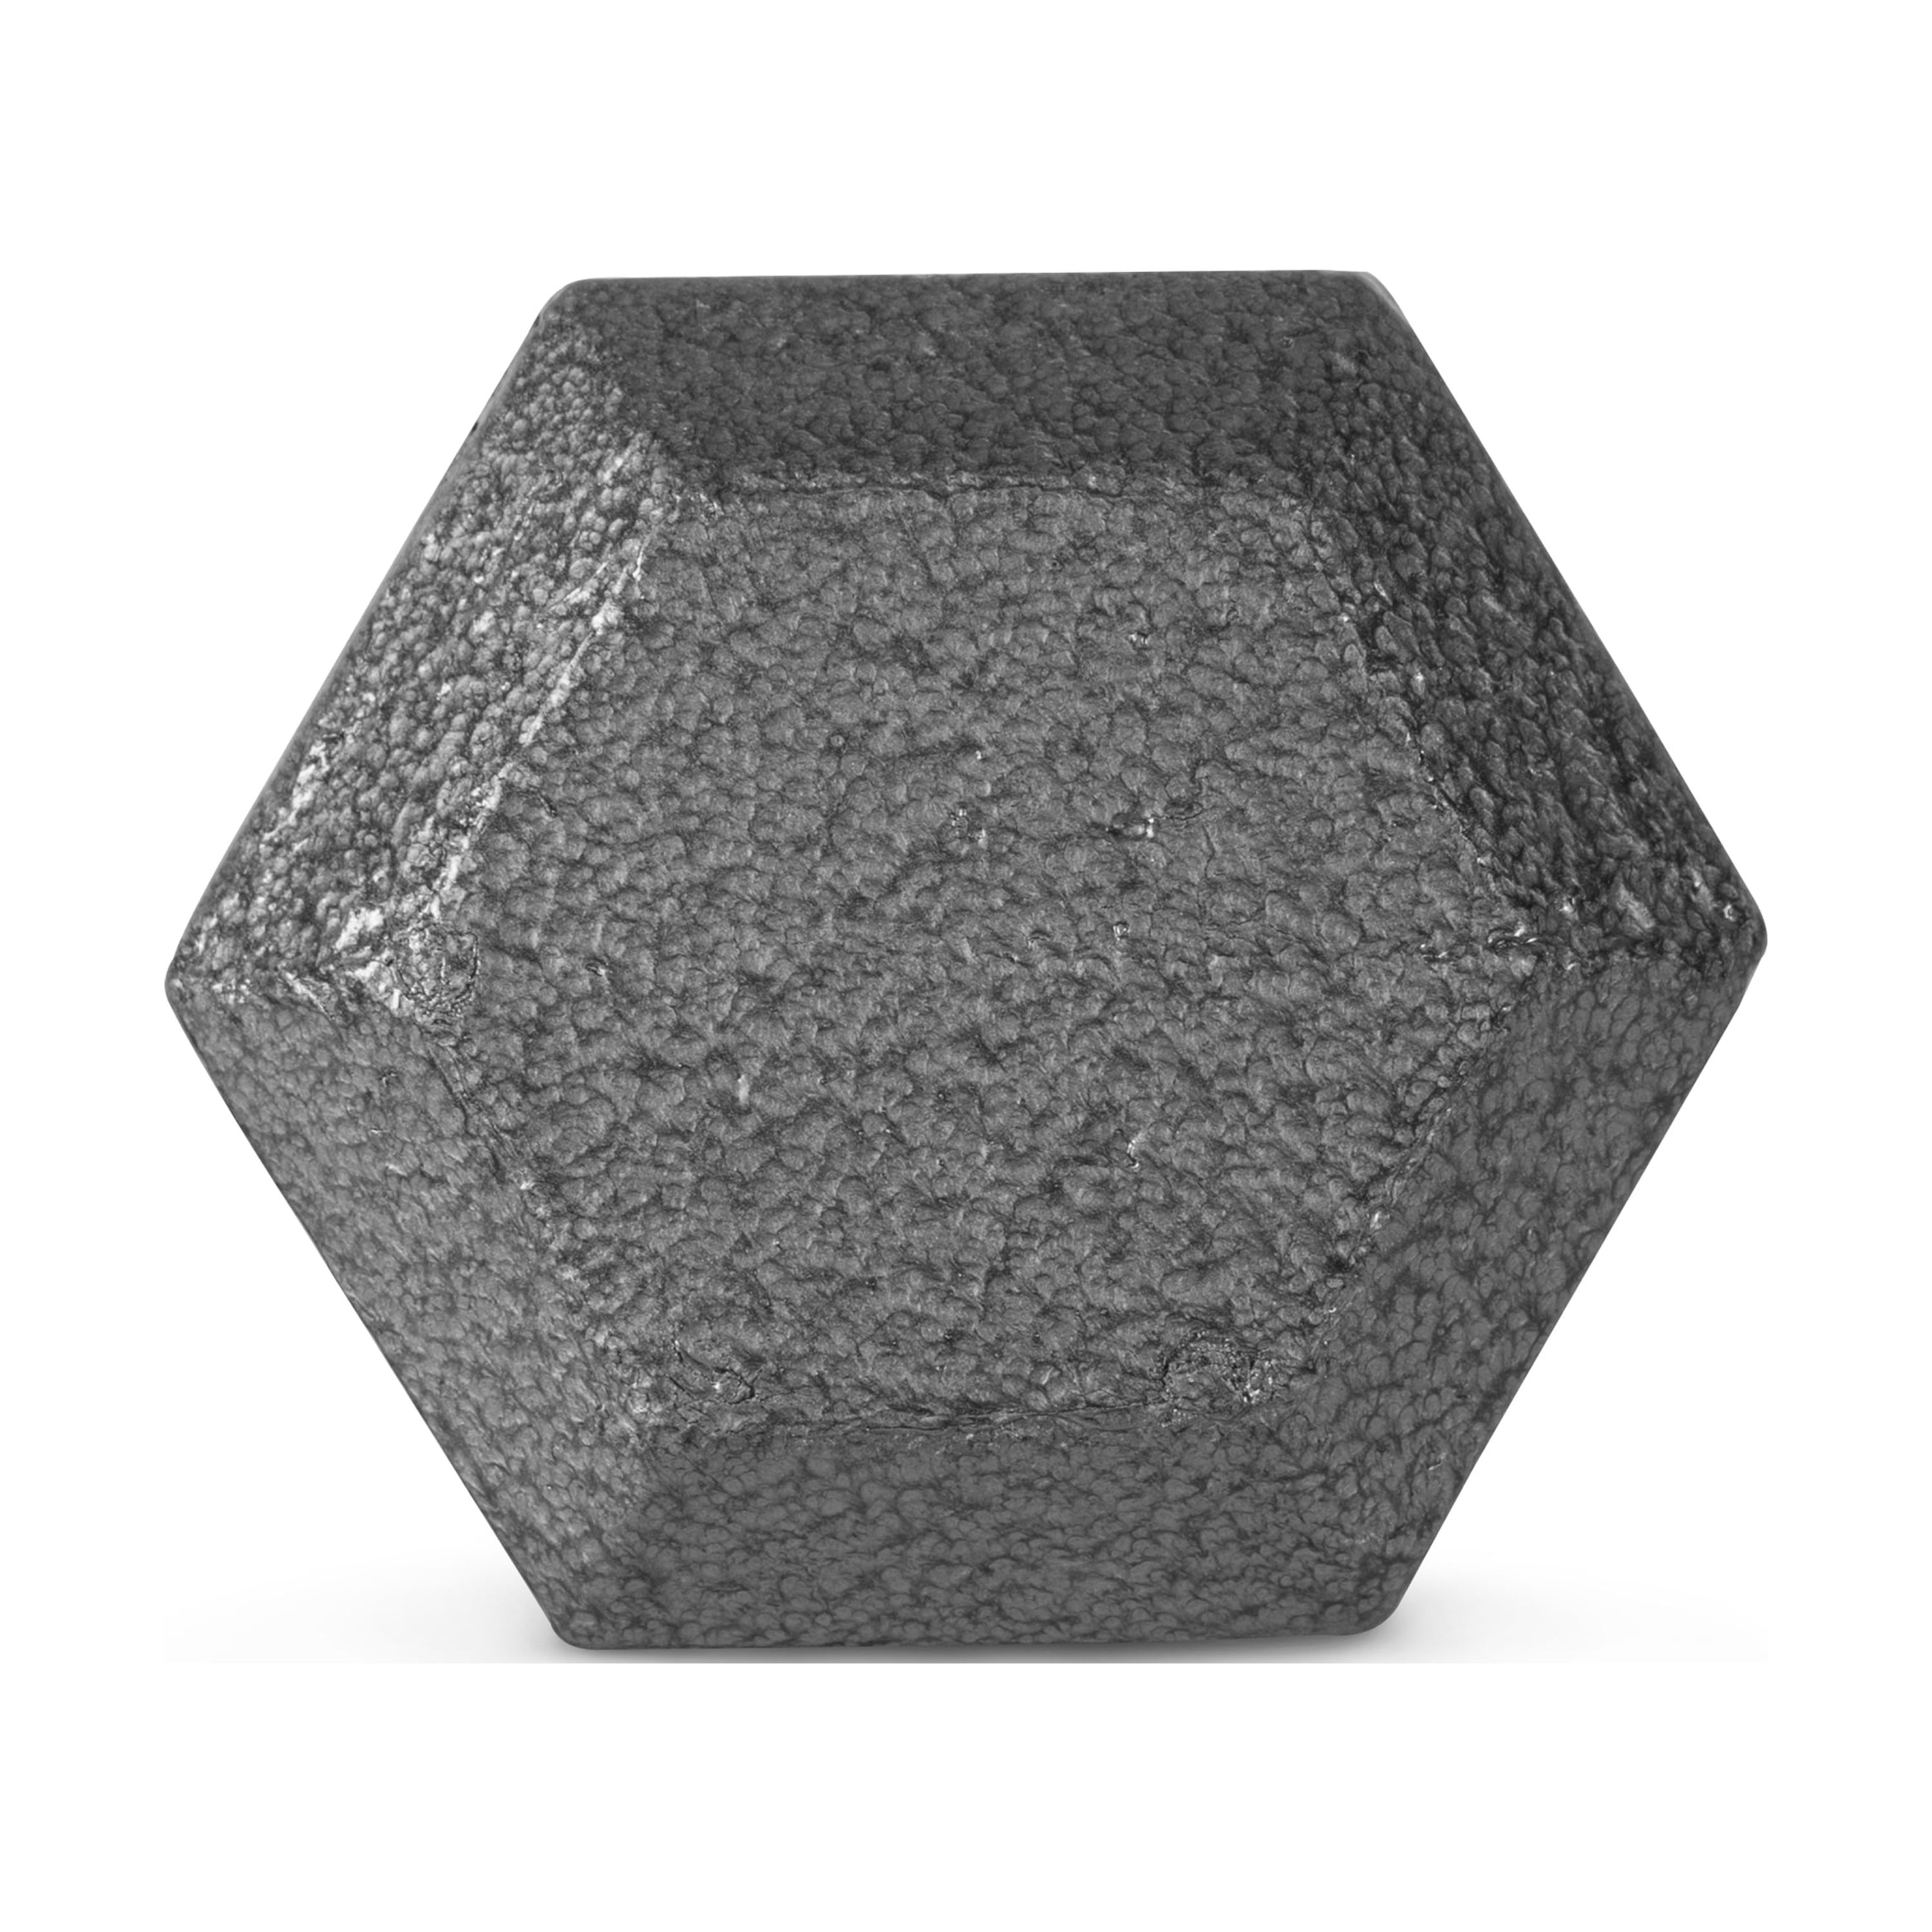 CAP Barbell 95lb Cast Iron Hex Dumbbell, Single - image 5 of 6